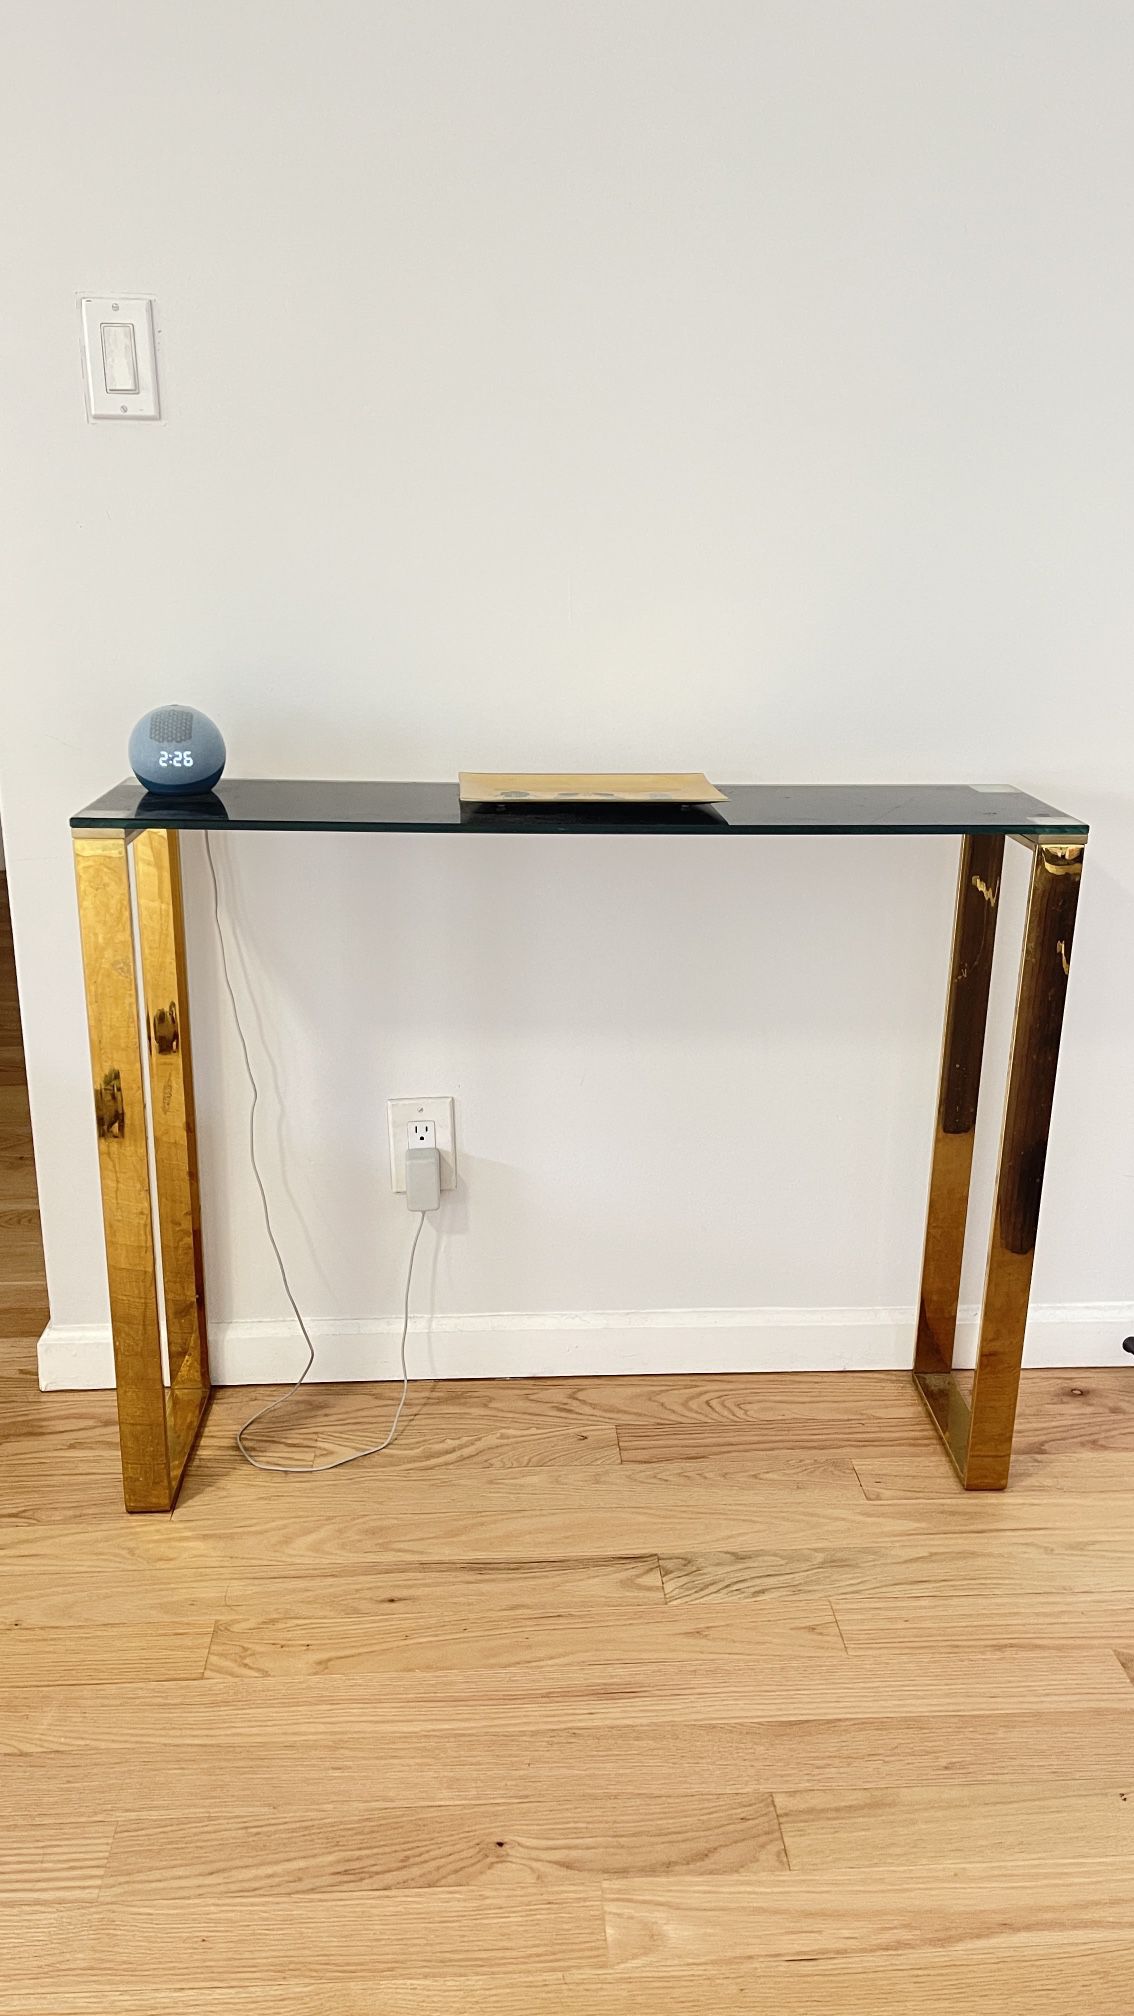 Gold console Table - like new!